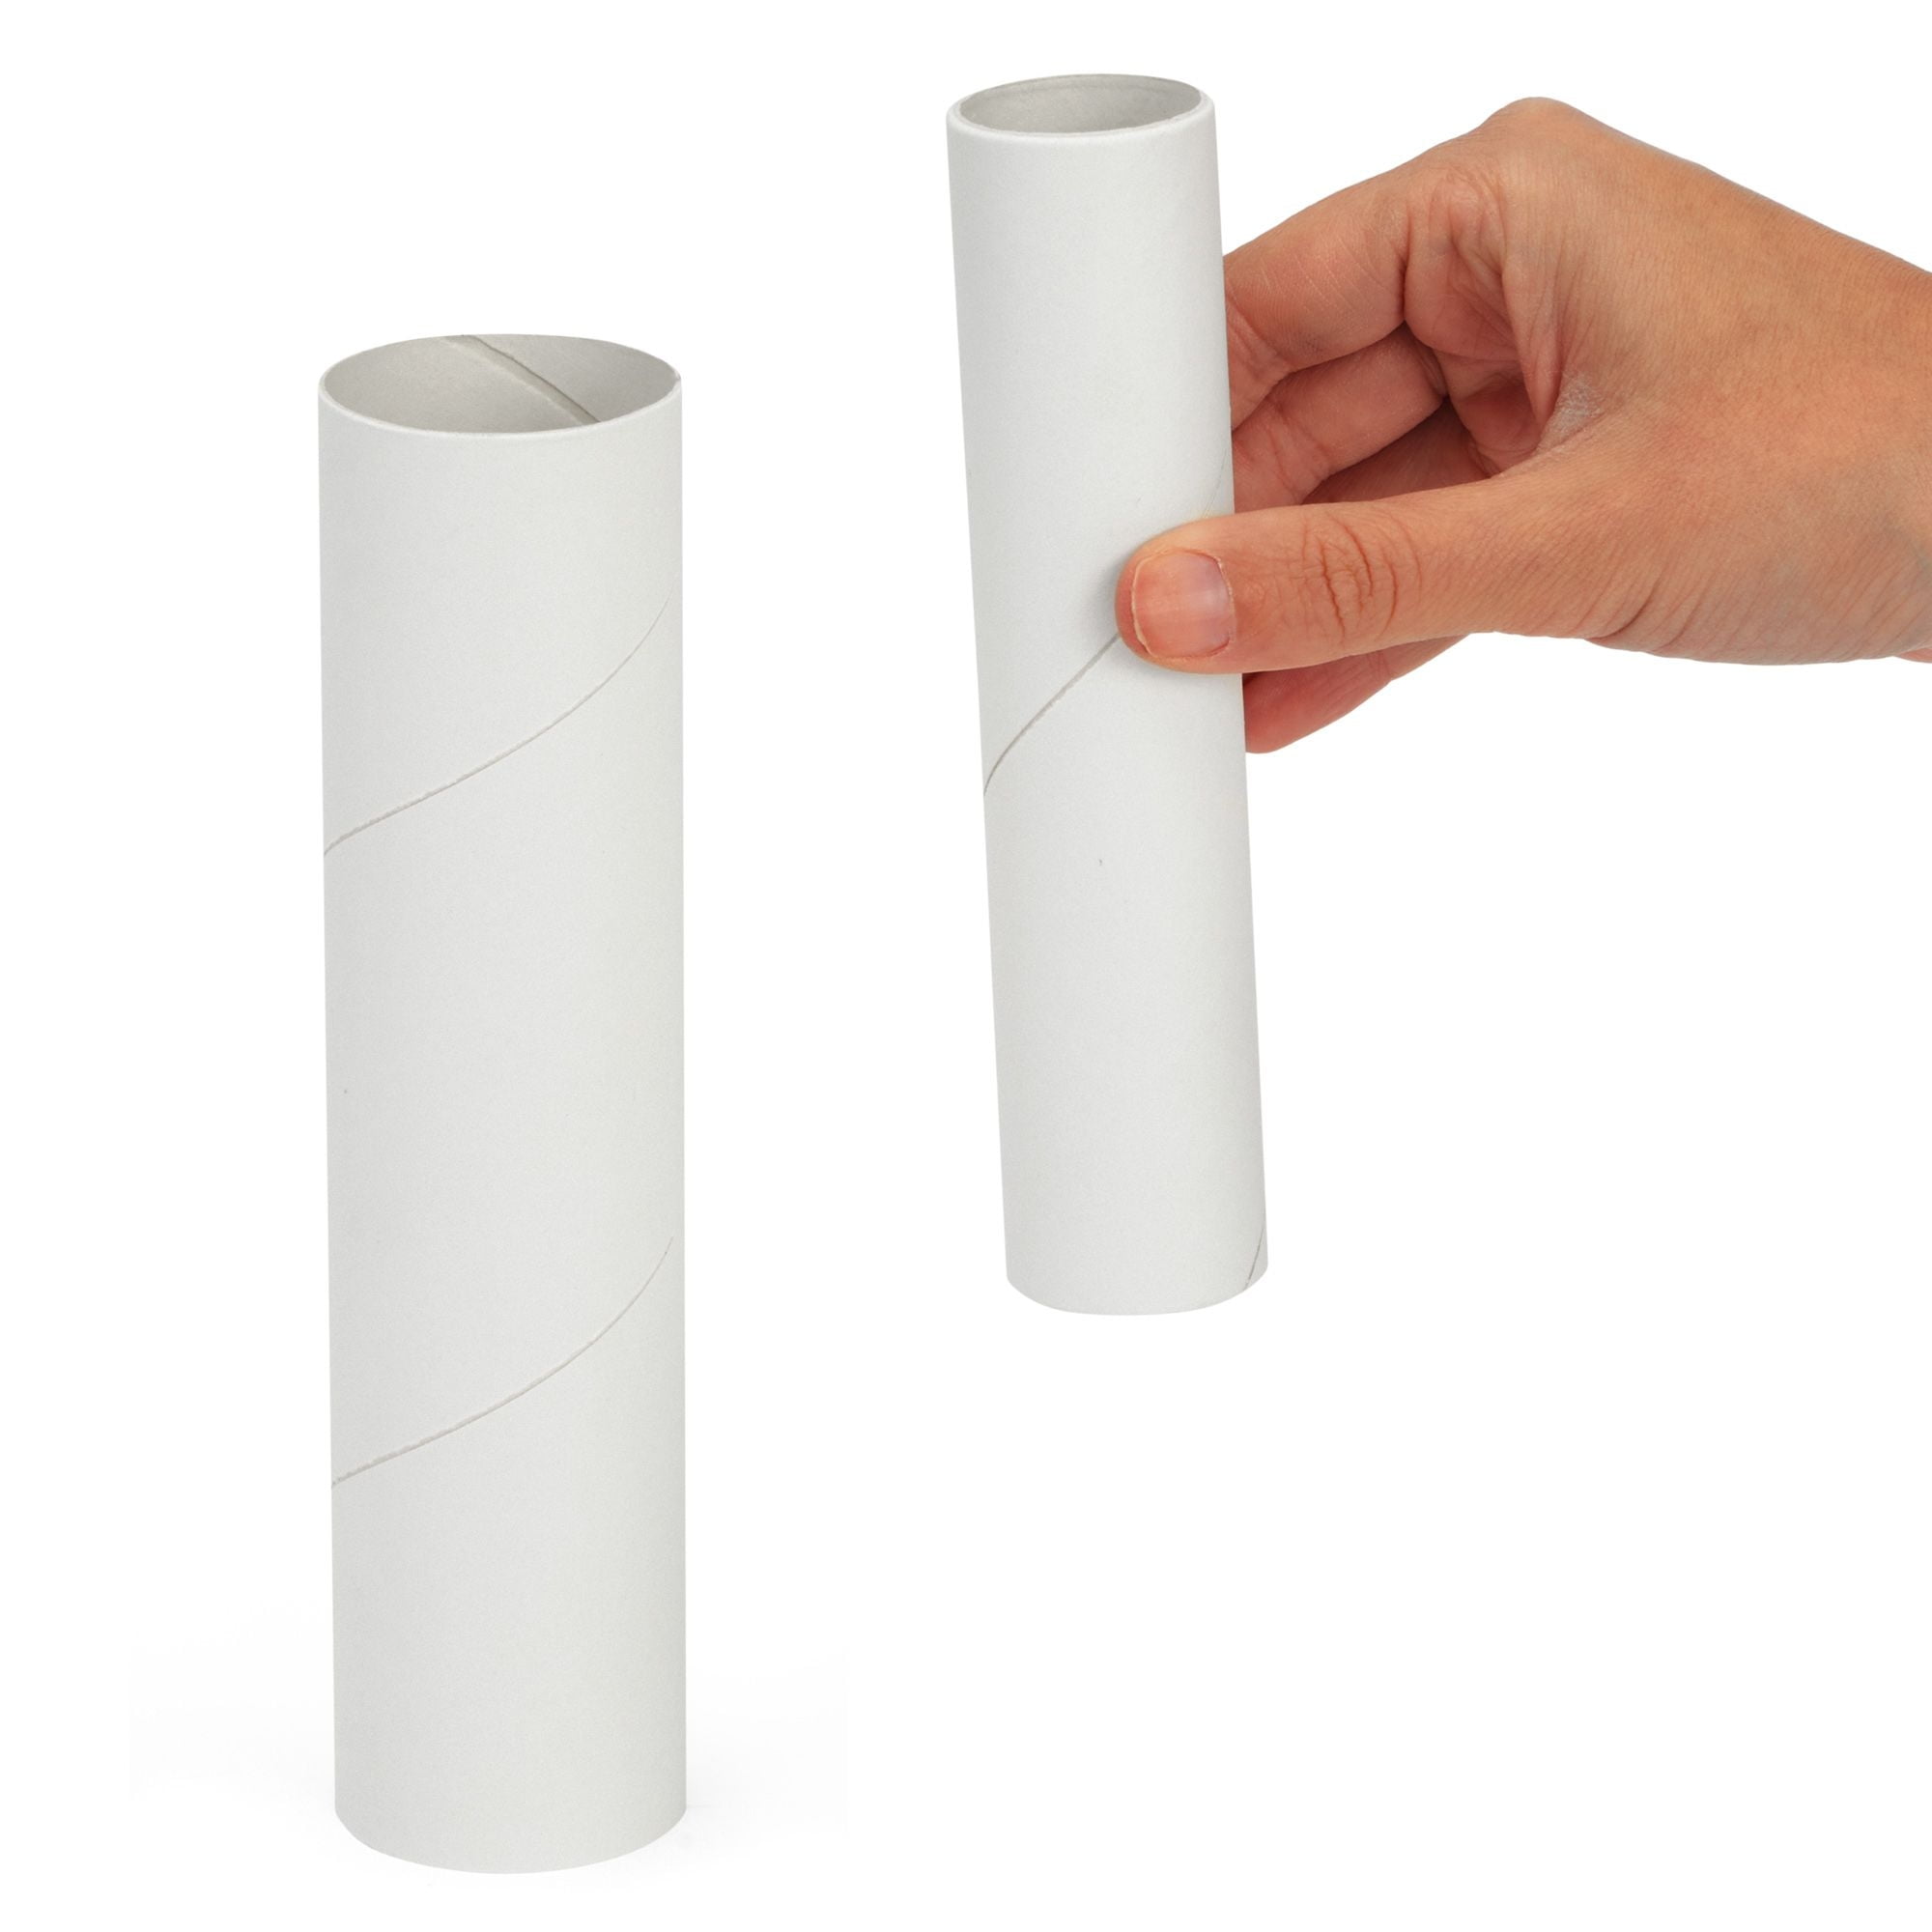 50 Brown Empty Paper Towel Rolls, 2 Size Cardboard Tubes for